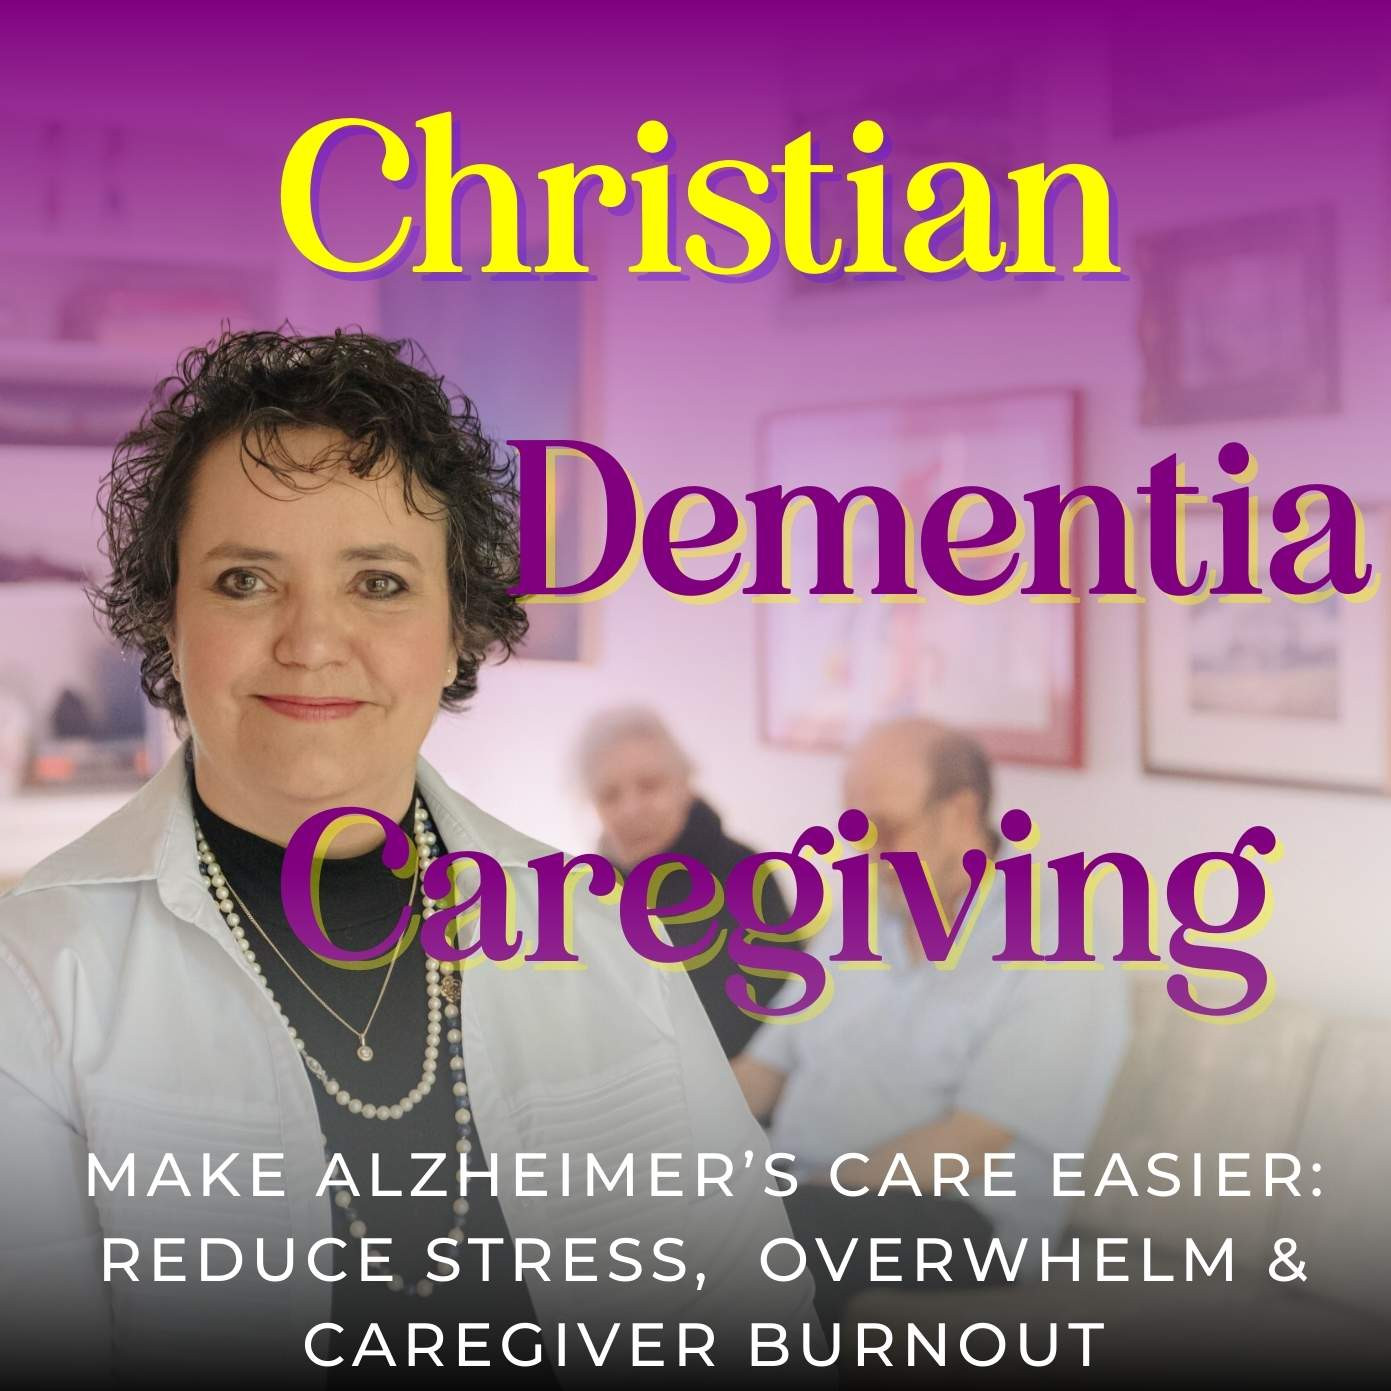 Christian Dementia Caregiving: Conversations To Ease the Stress, Overwhelm and Burden of Alzheimer’s/Dementia Care From A Biblical Perspective.